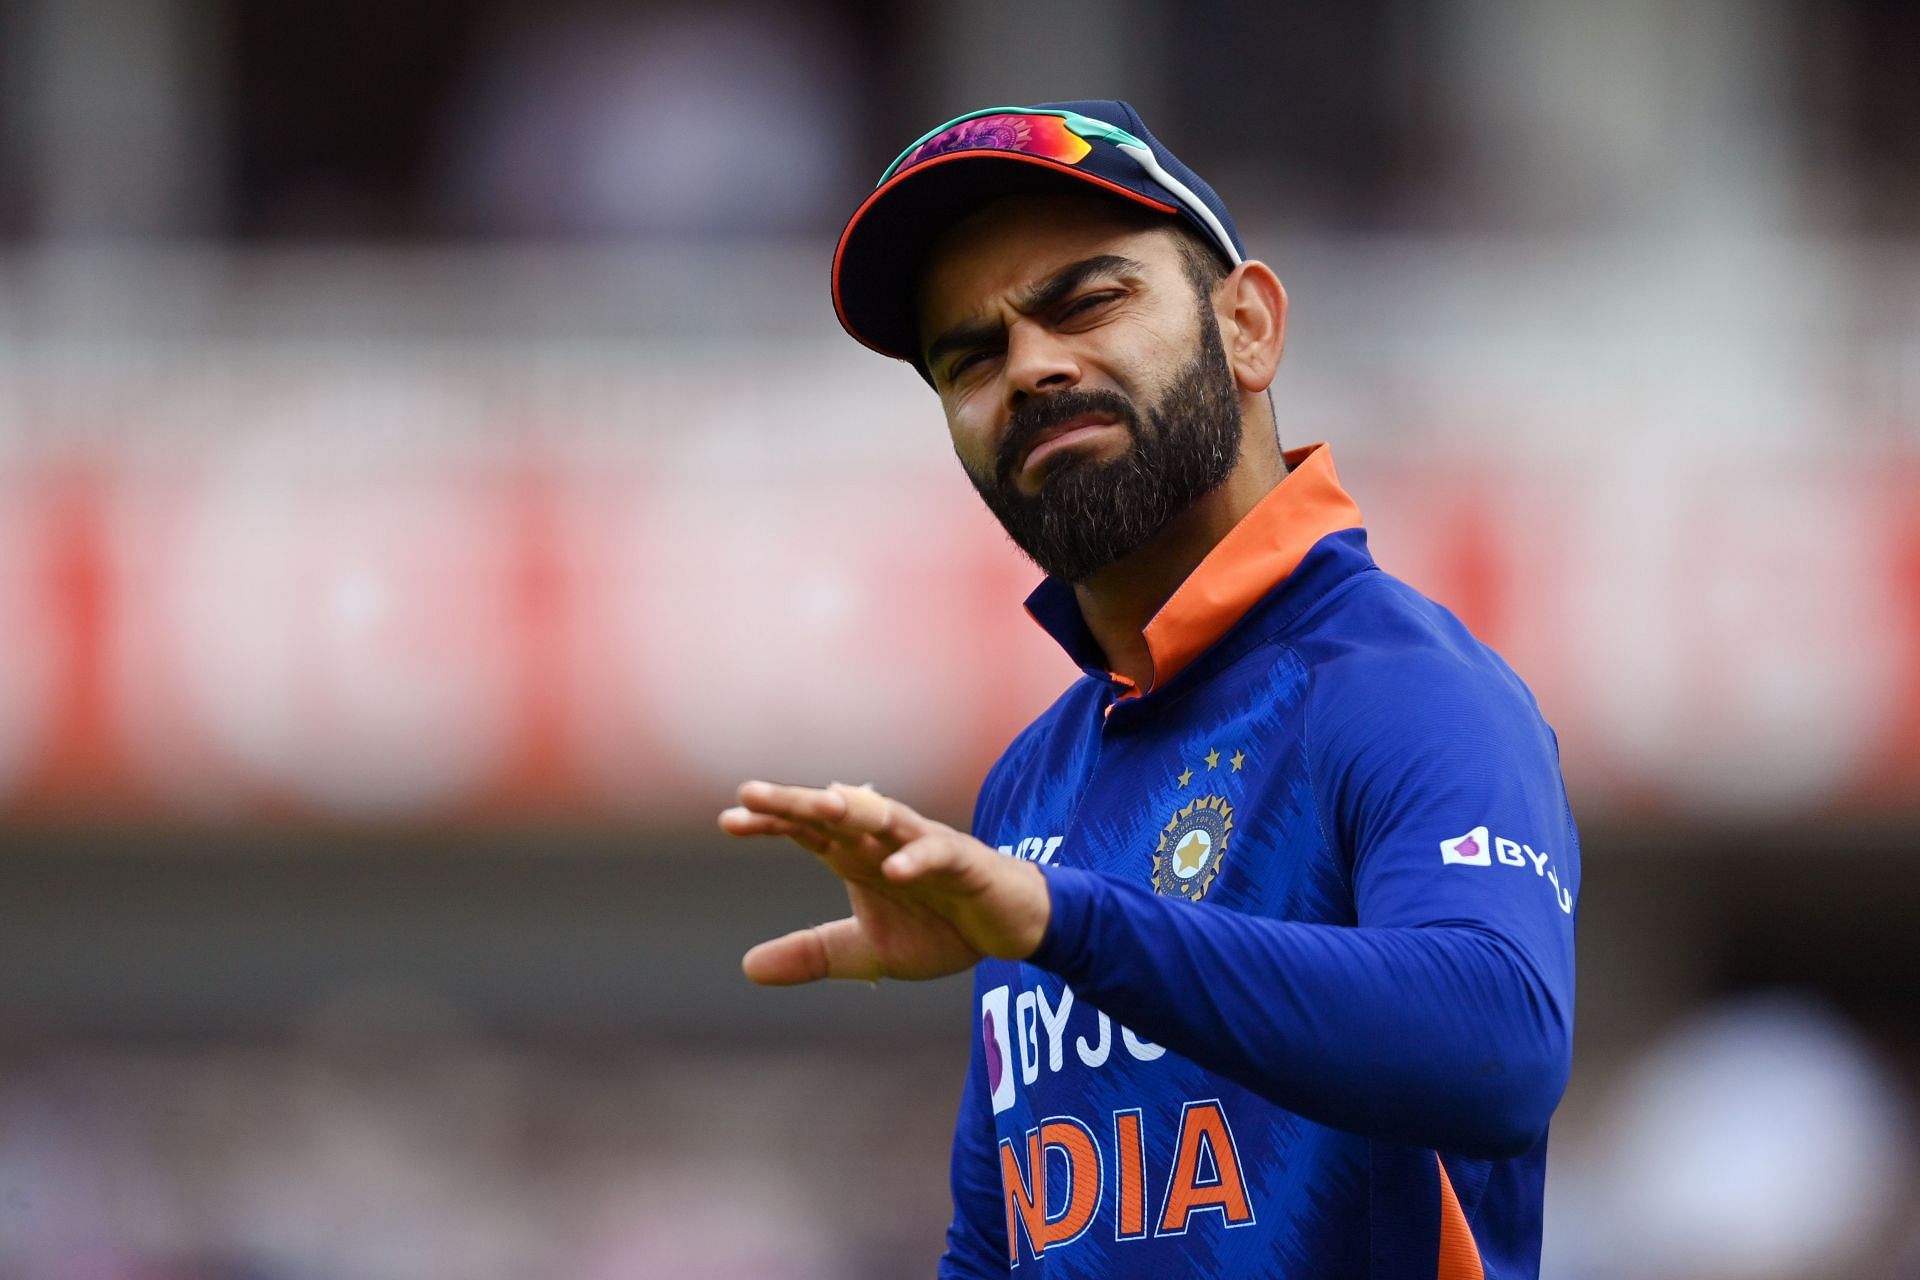 Virat Kohli was dismissed for 16 in the second ODI. Pic: Getty Images